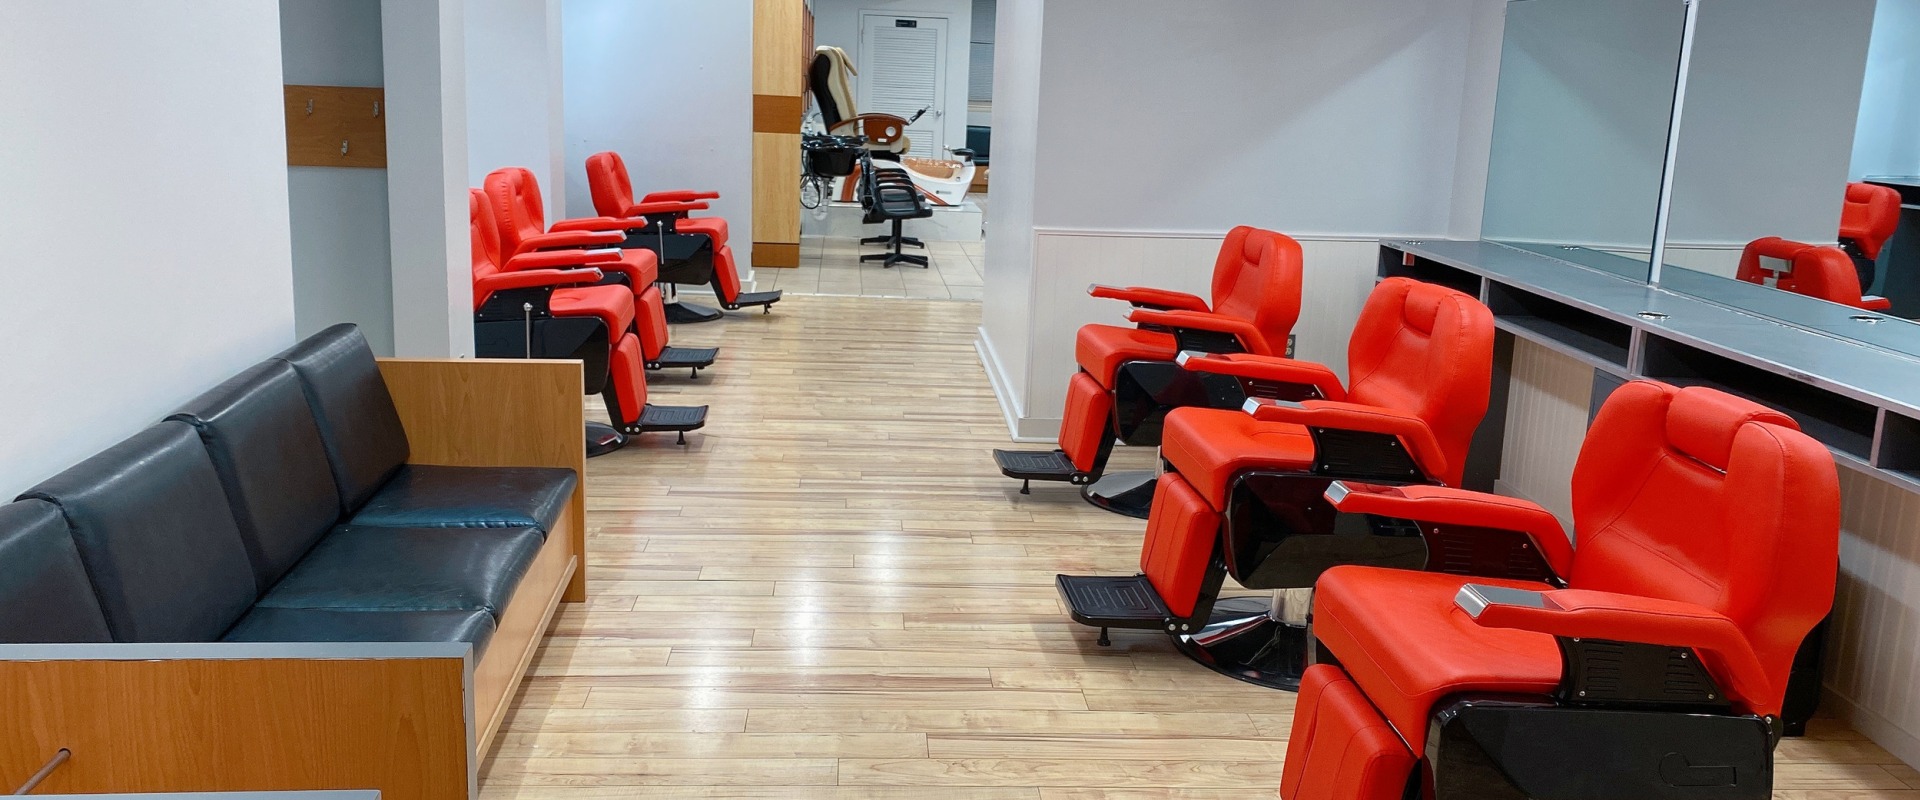 The Best Barber Shops in Washington DC for a Relaxing Massage